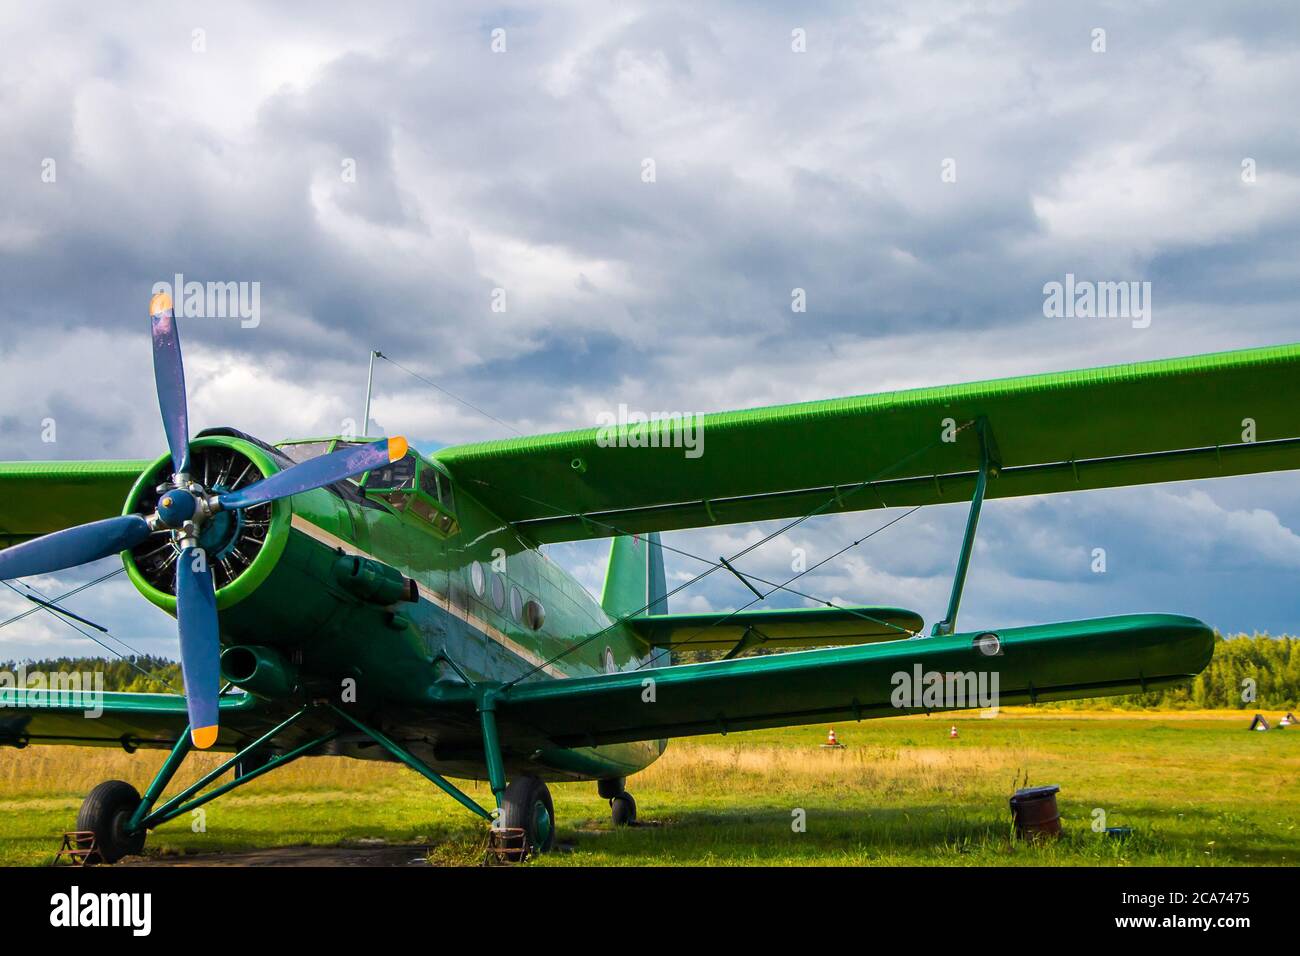 Russia, Tver - 08.15.2015: Vintage aircraft preparing for take-off on the background of a stormy sky Stock Photo